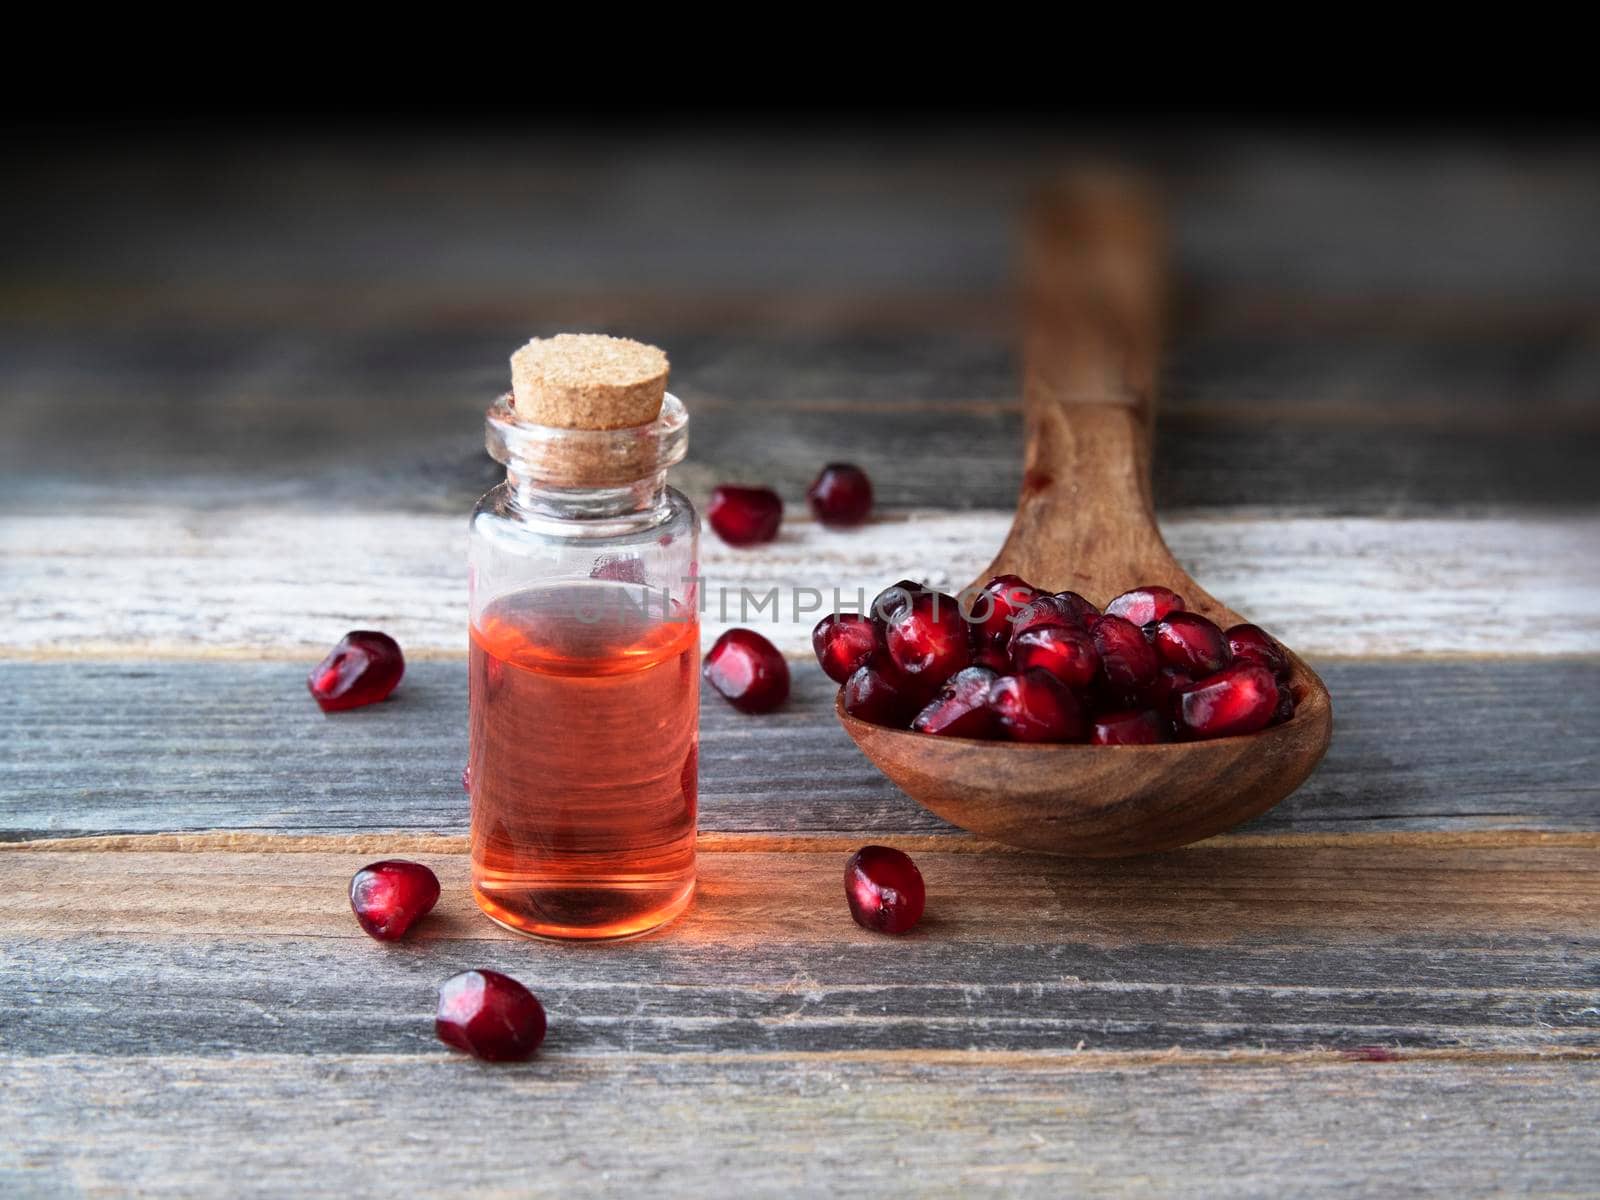 Wooden spoon full o pomegranate seeds and a small bottle of pomegranate extract.